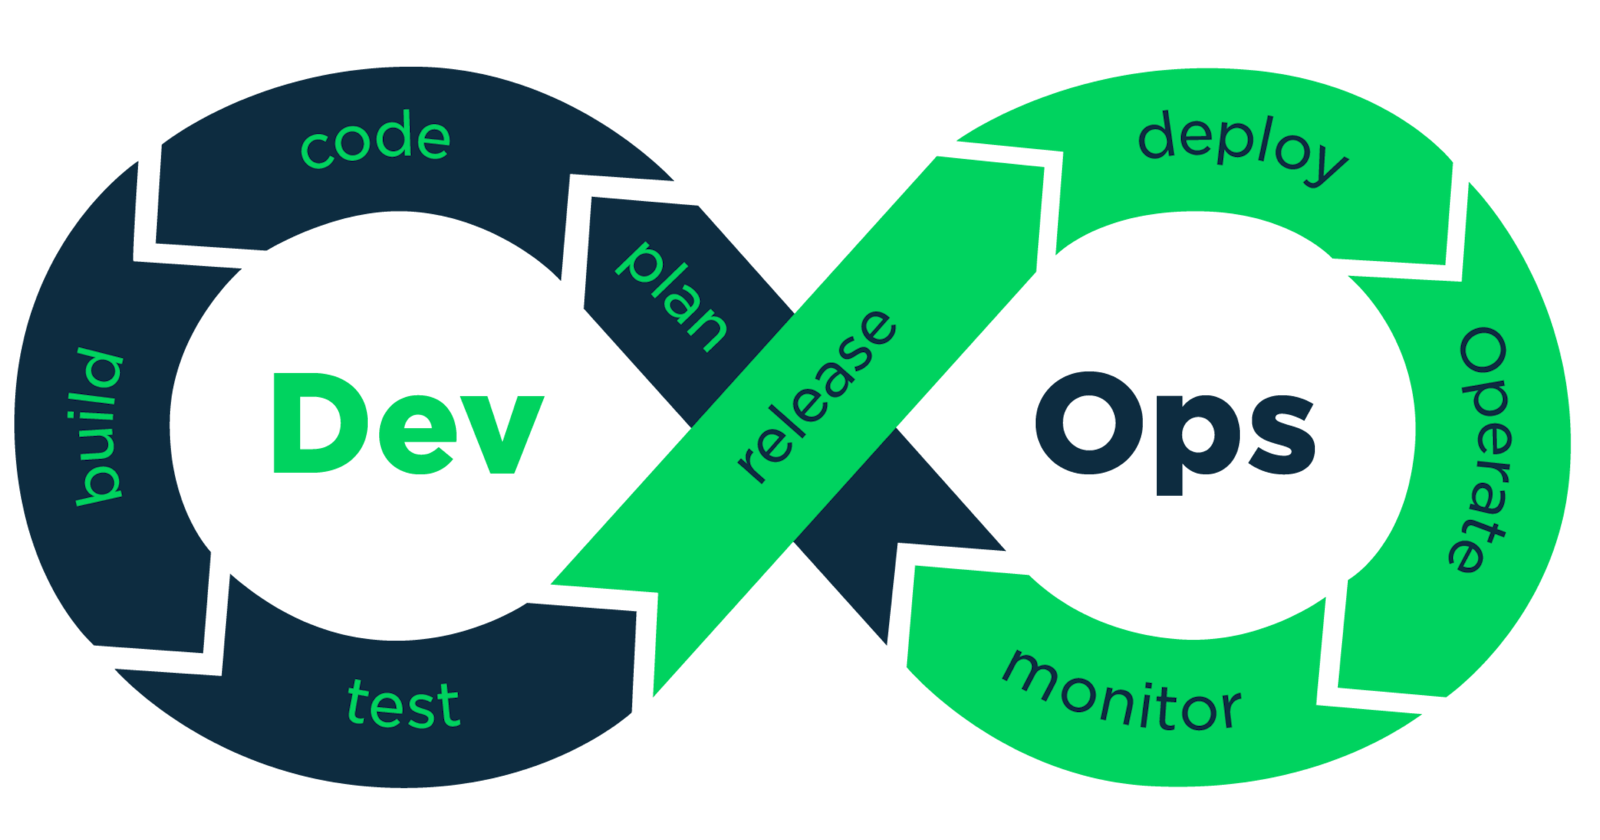 Day 1: Introduction to Devops